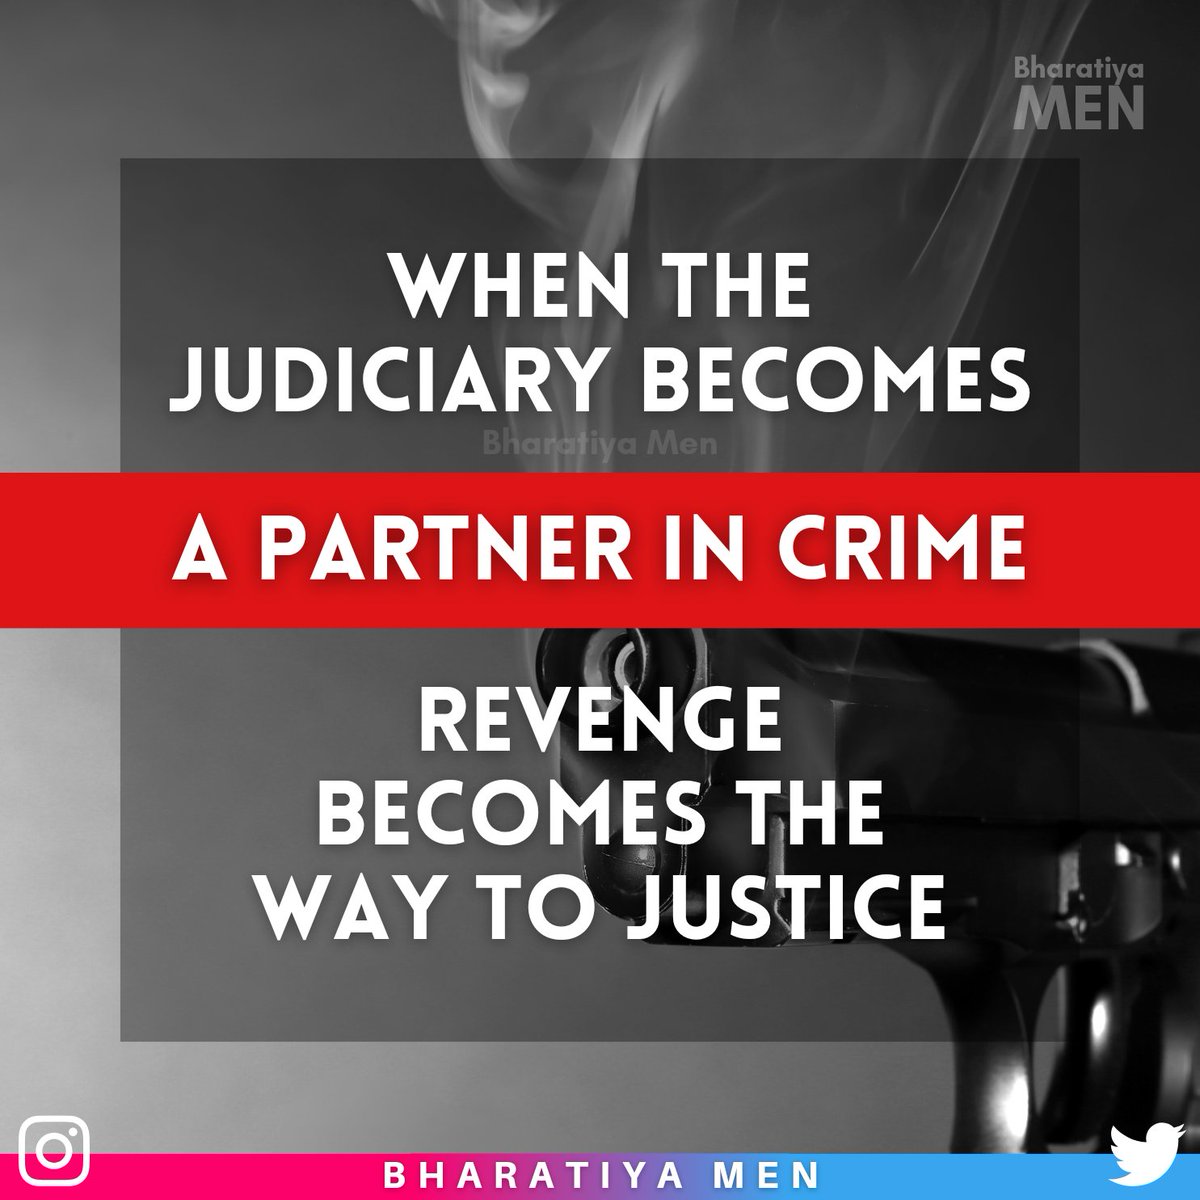 When the judiciary becomes a partner in crime, revenge becomes the way to justice. #JudicialMisandry #PinkTerrorism #FeminismIsCancer #Men #MenRightsAreHumanRights